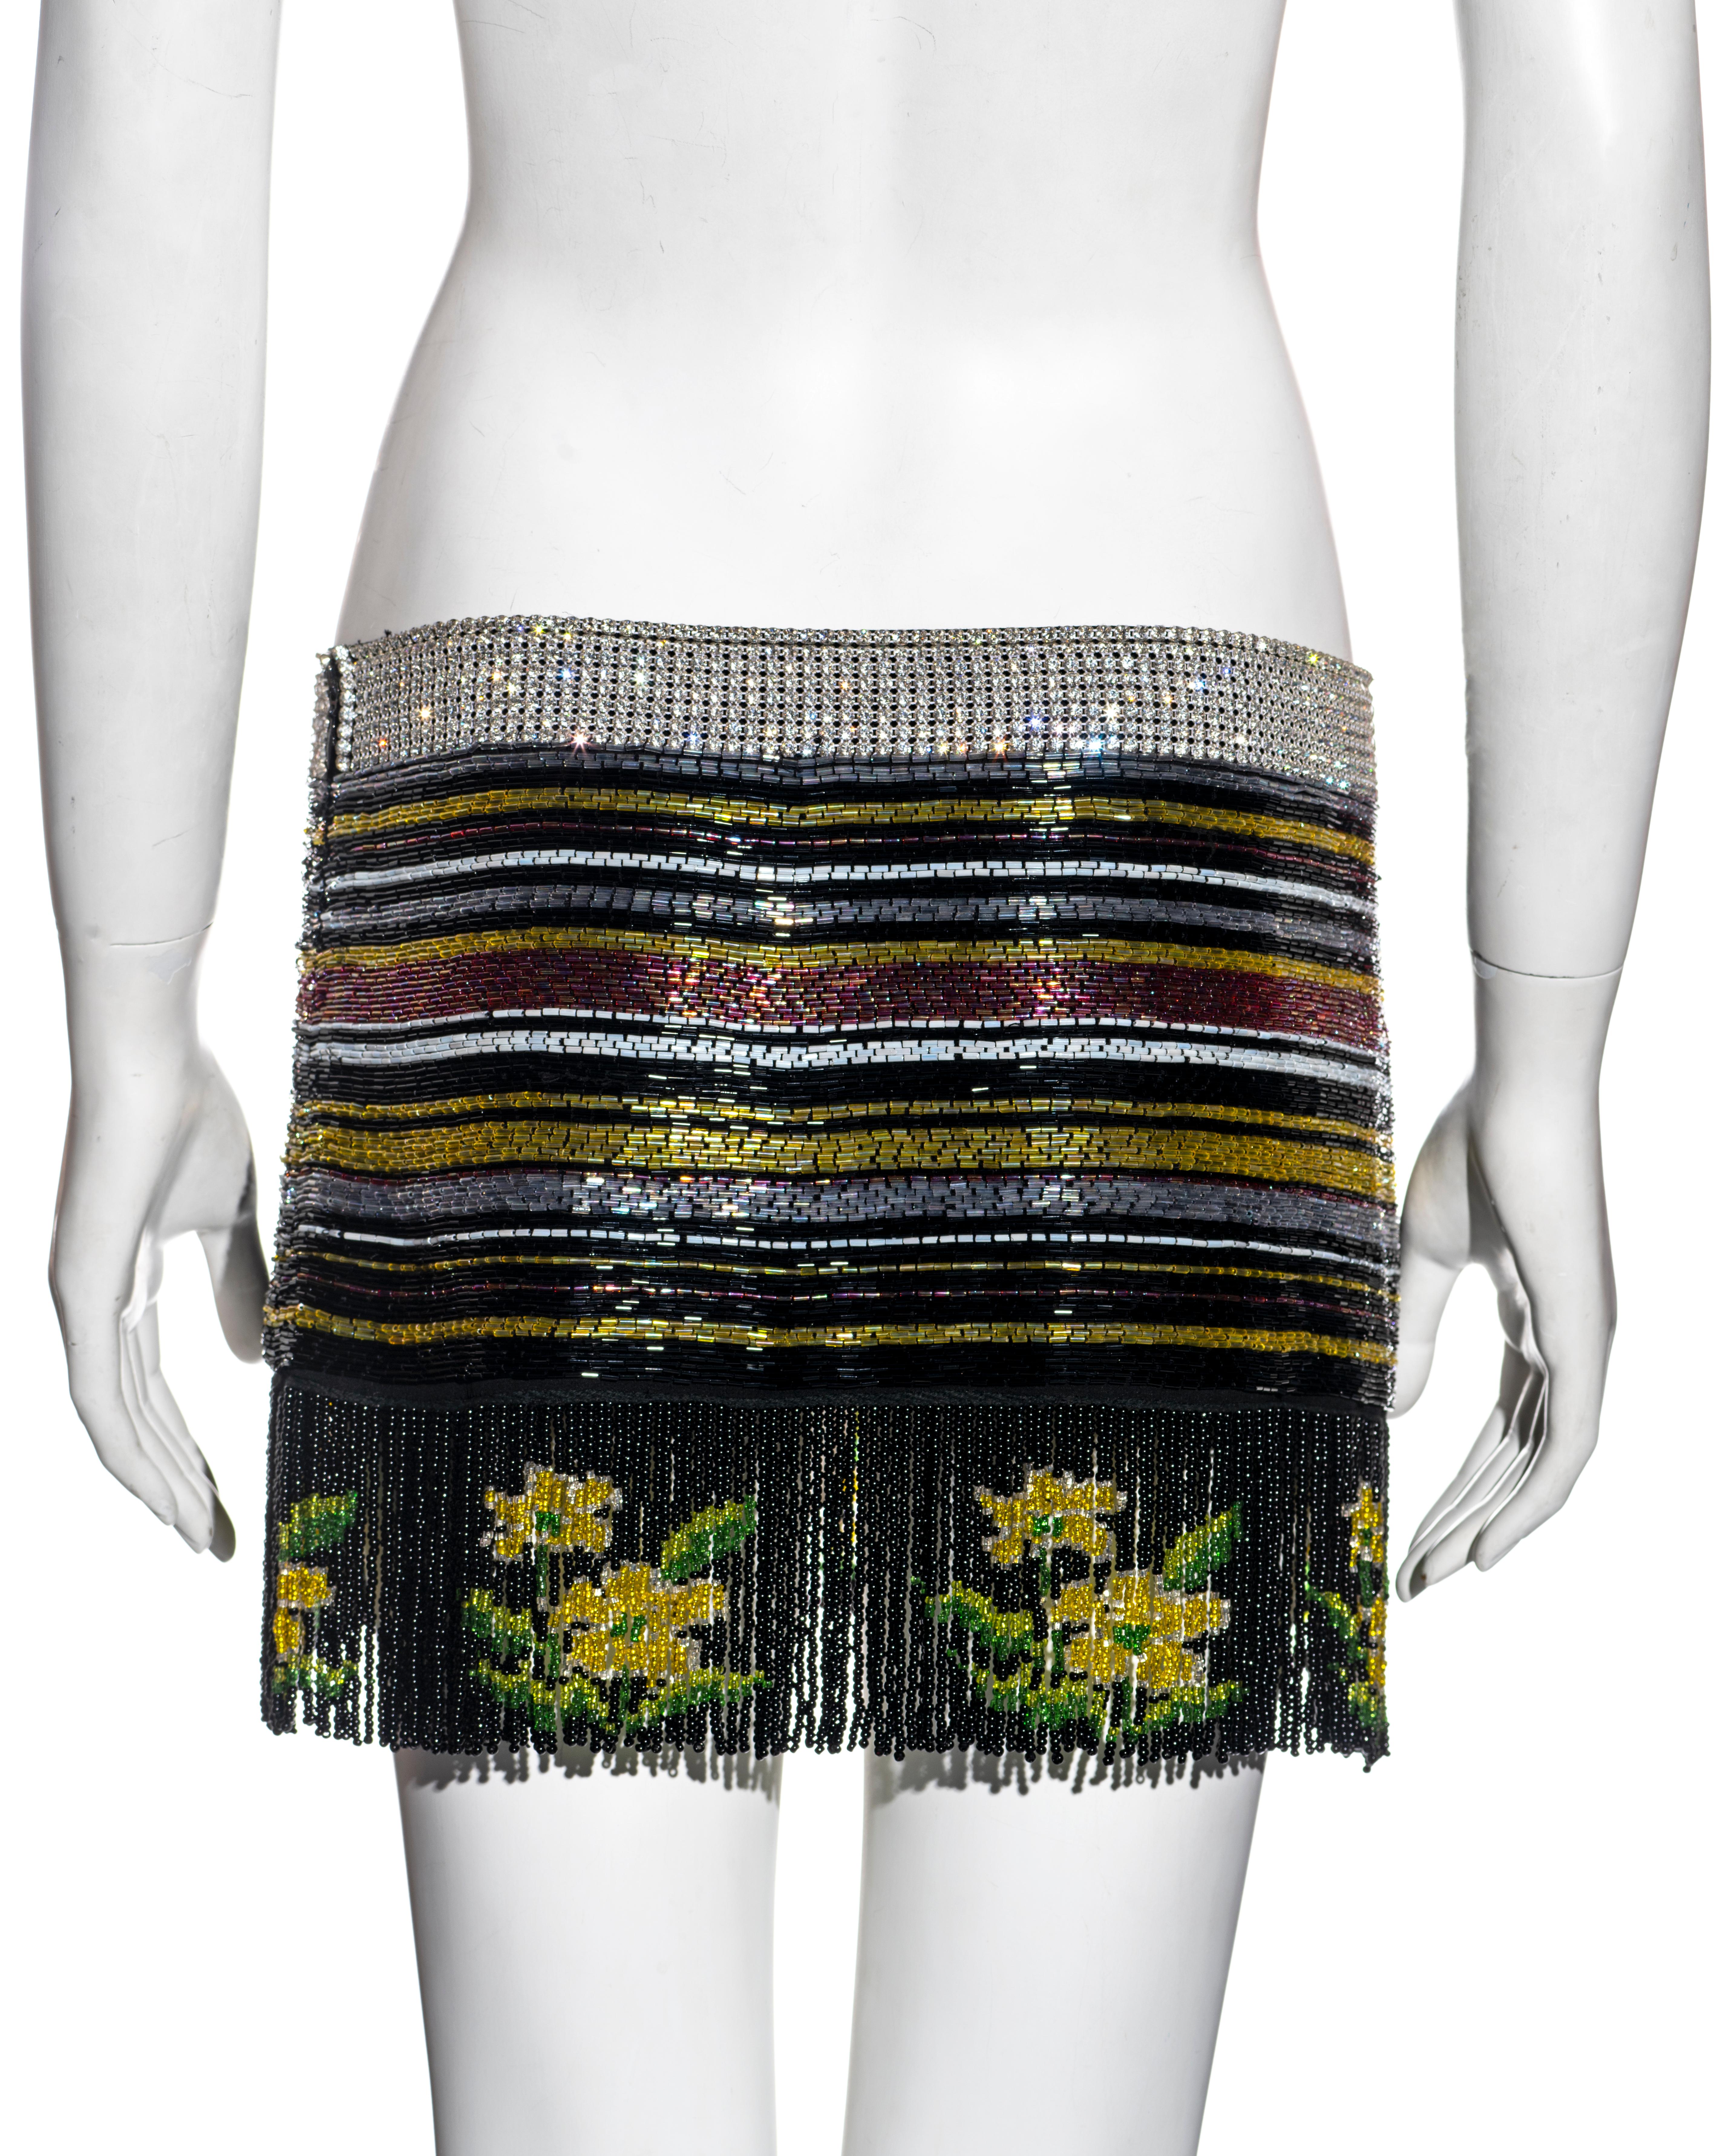 Dolce & Gabbana beaded mini skirt with crystals and tassels, ss 2000 2